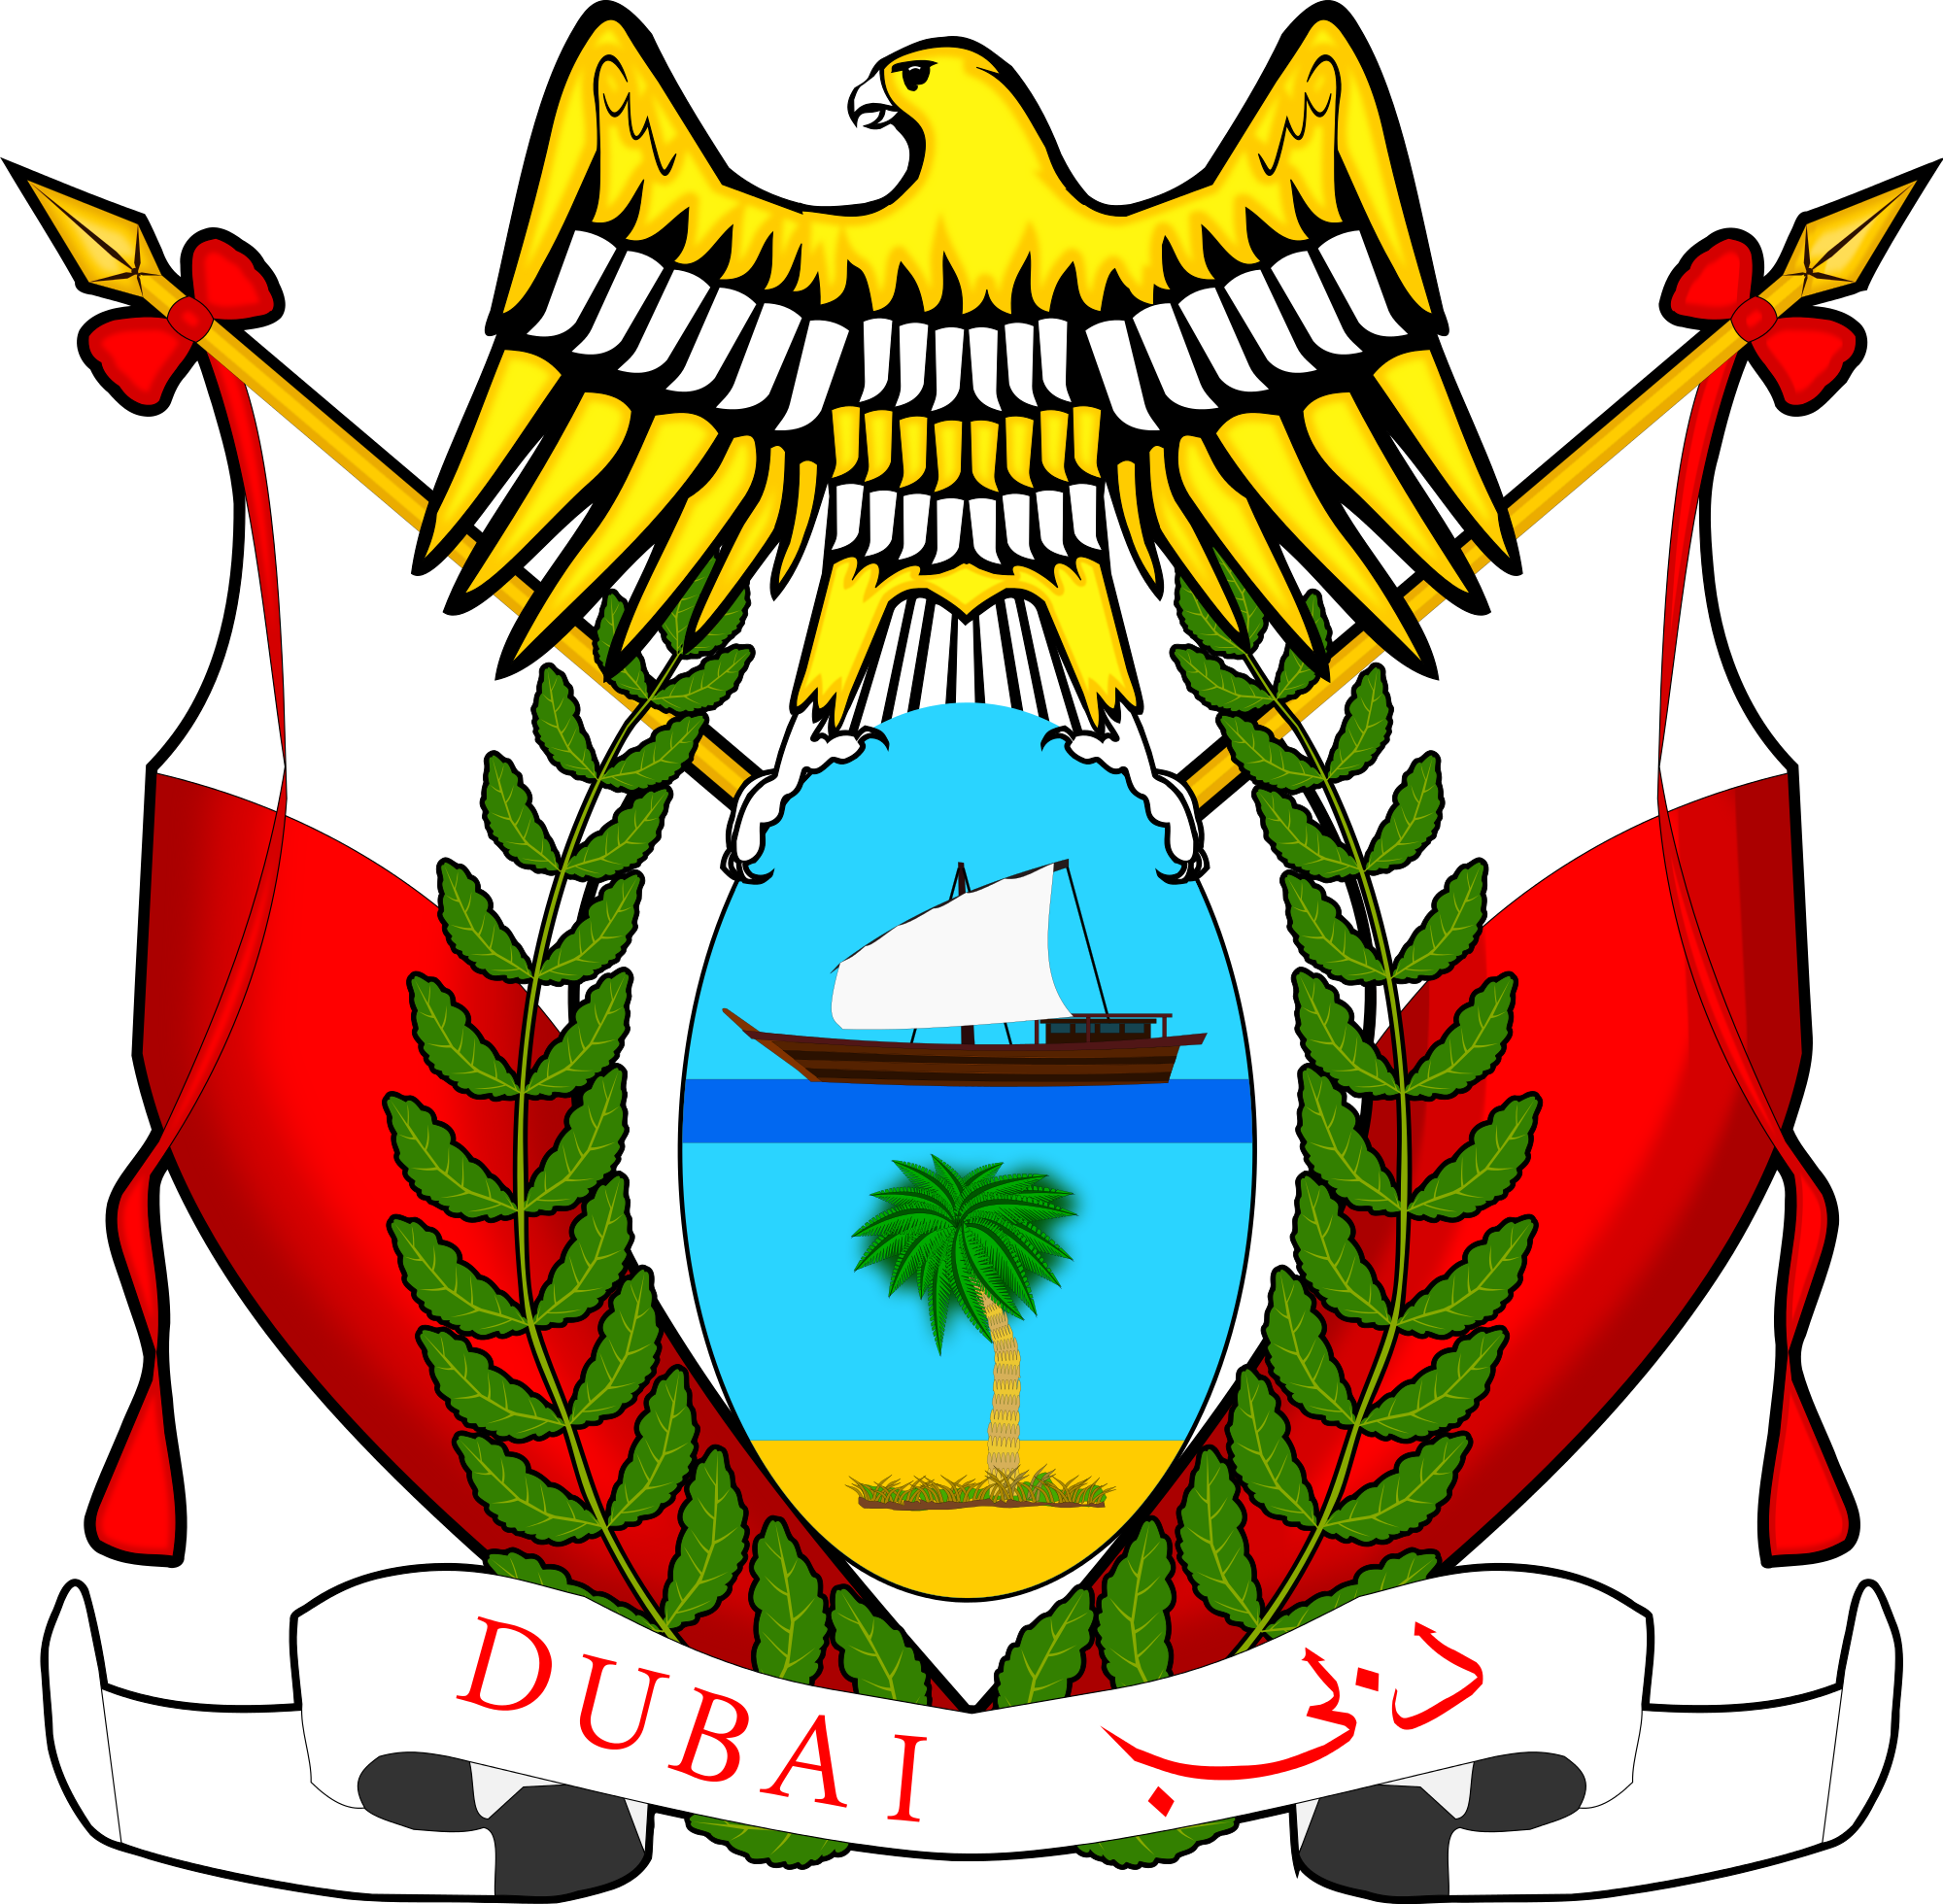 A Coat Of Arms With A Bird And A Palm Tree